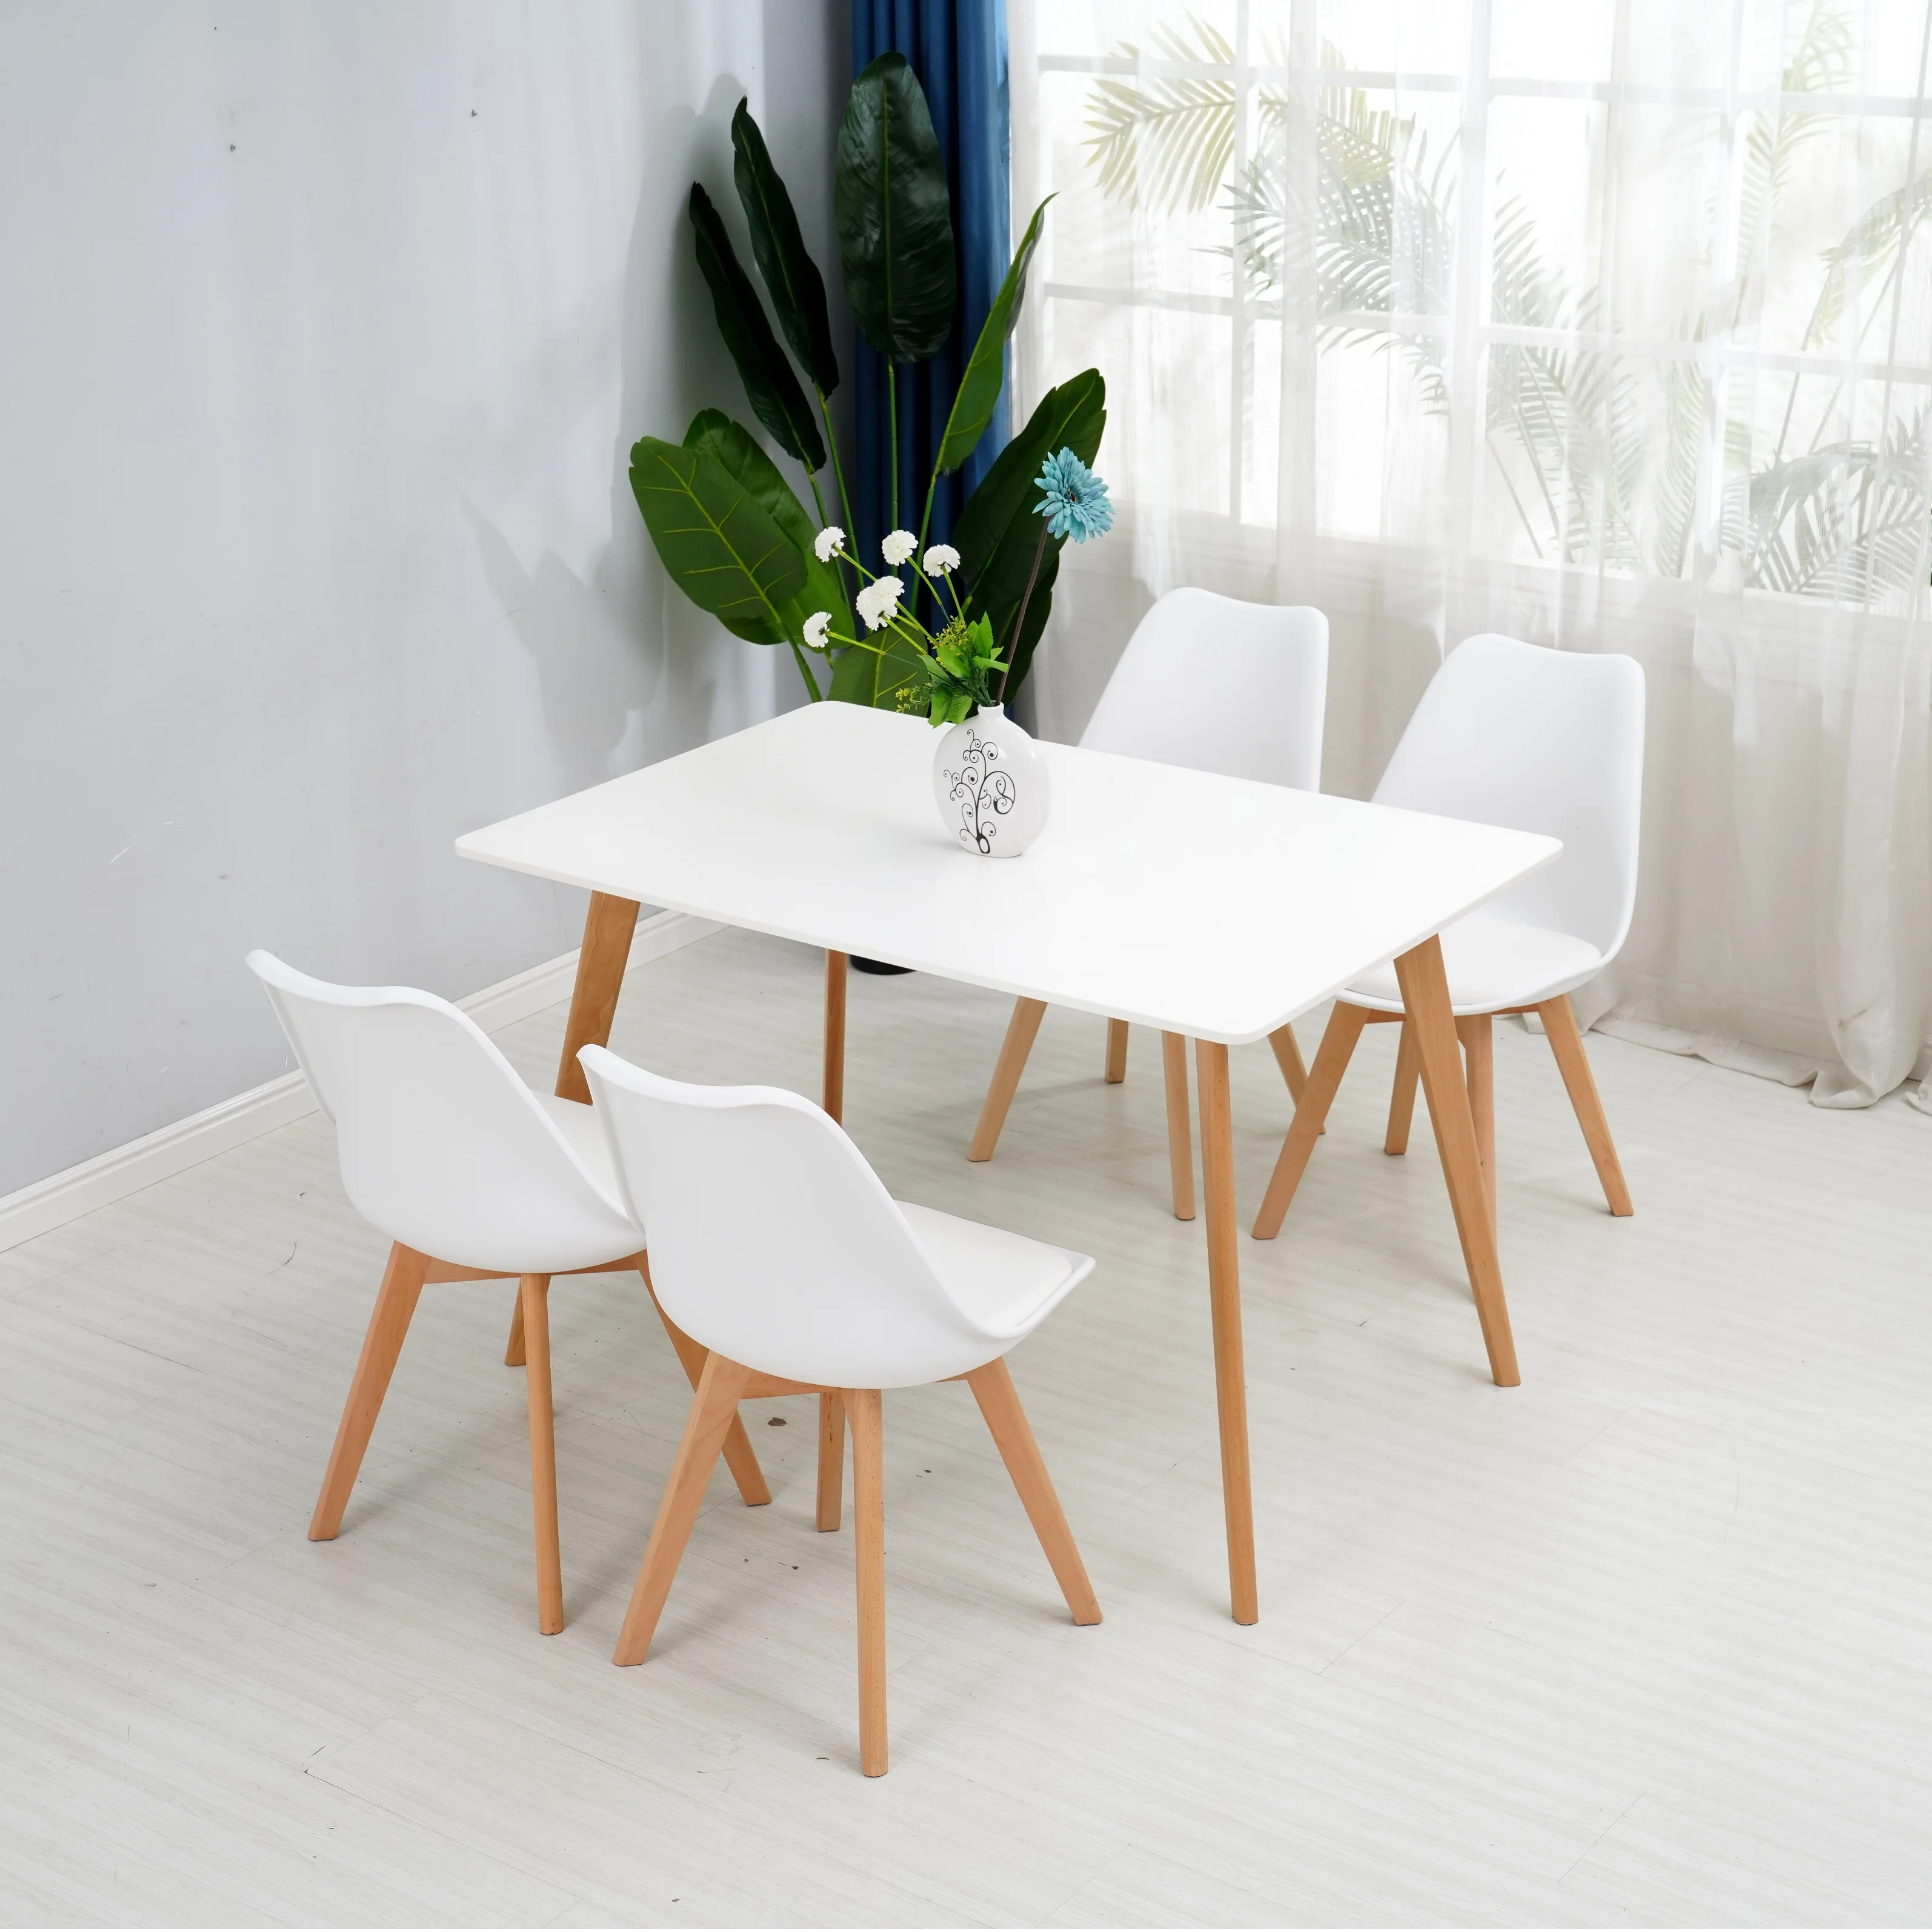 Wholesale Dining Room Sets / Fashion Modern Dining Room Table Marble Top Dining Tables Buy At The Price Of 480 00 In Aliexpress Com Imall Com - Yaheetech dining chairs dining room chair living room side chairs tufted parsons chairs with solid wood legs for hotel, restaurants, wedding banquet, meeting, celebration, set of 4.